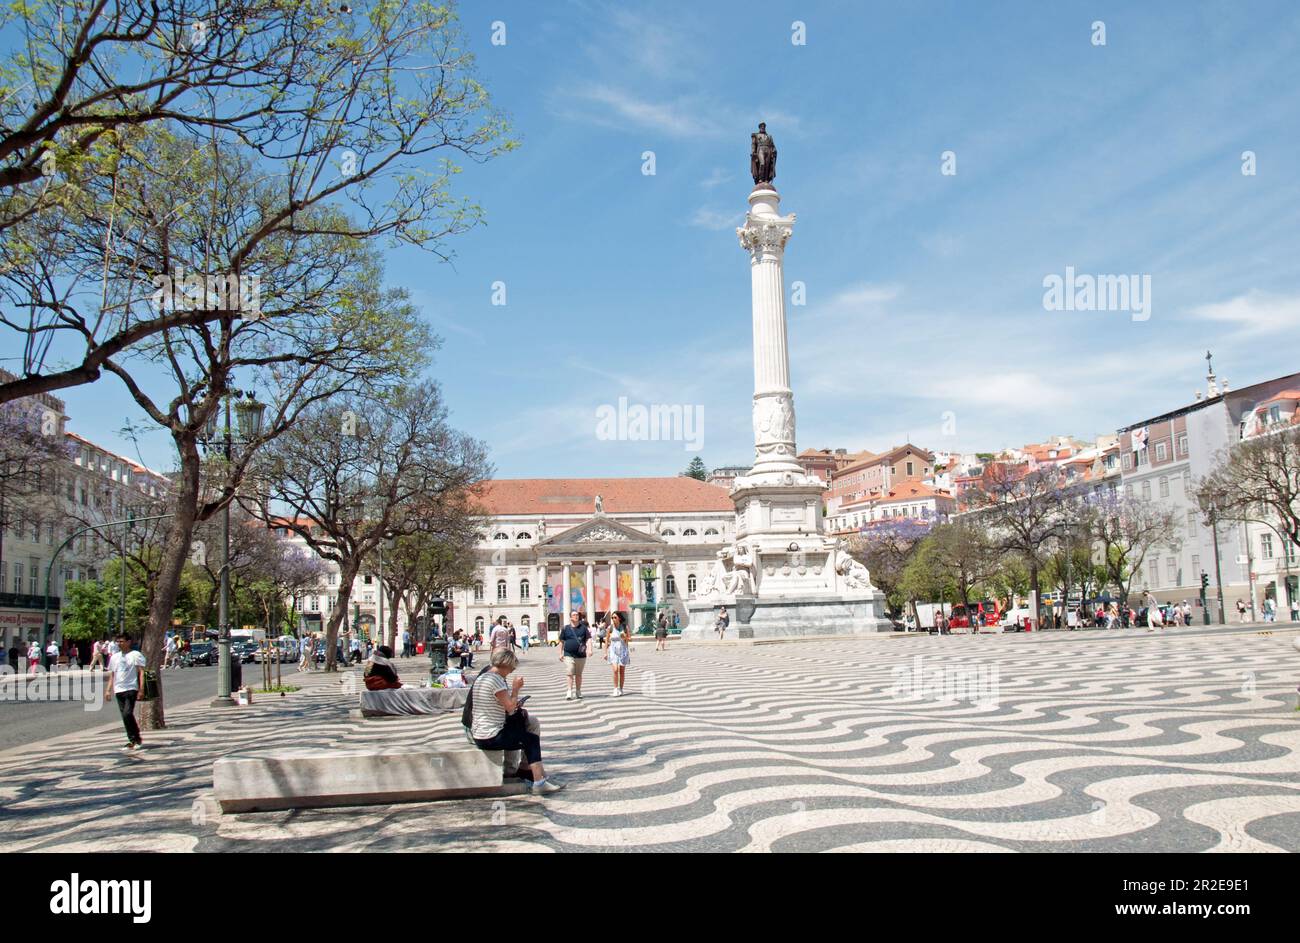 Rossio Square with an enormous Statue of Don Pedro IV and fountain, Rossio Square, Lisbon, Portugal Stock Photo